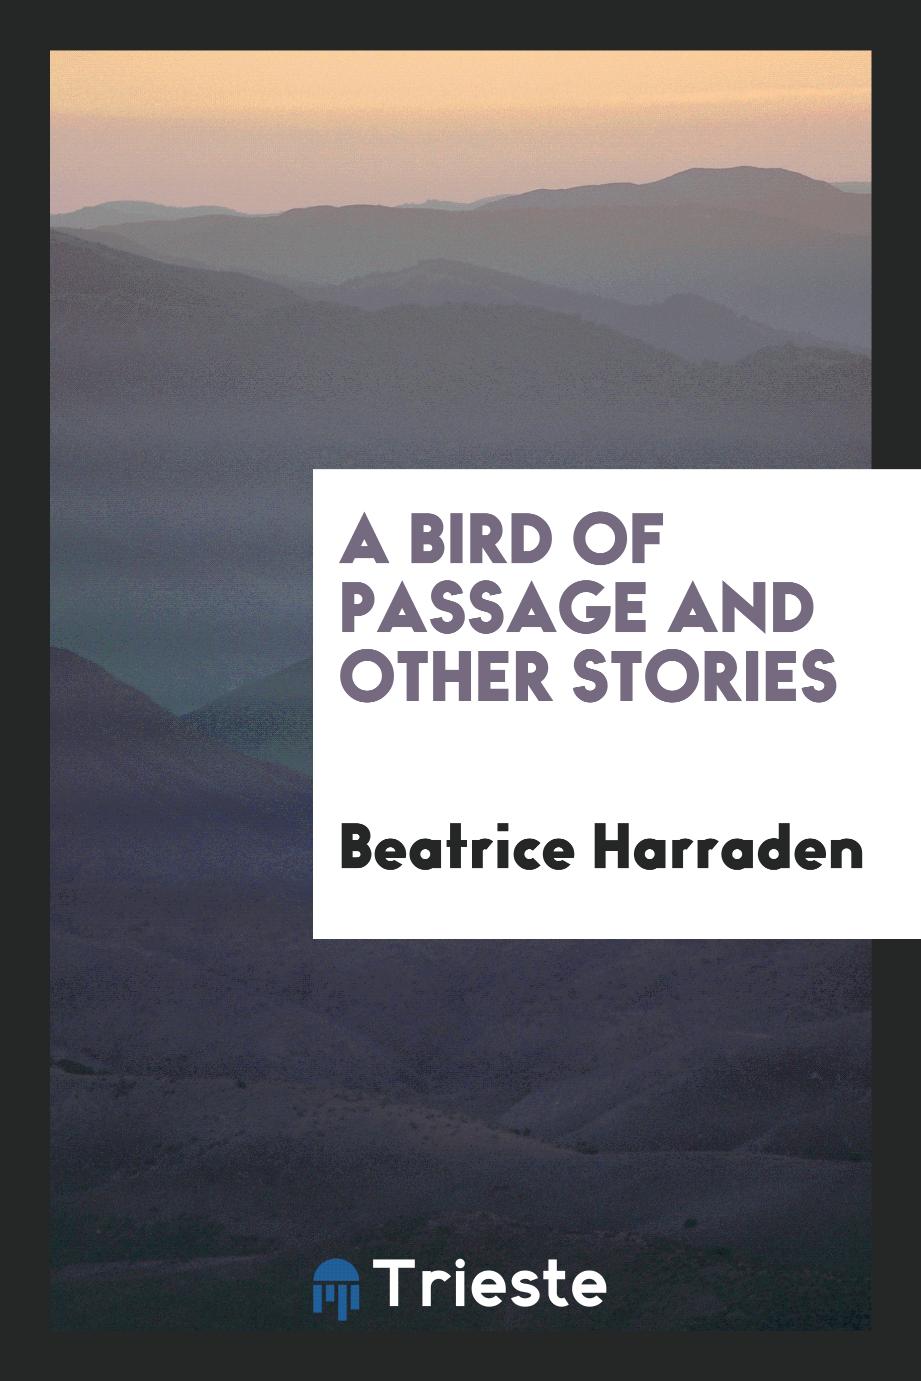 A Bird of Passage and Other Stories